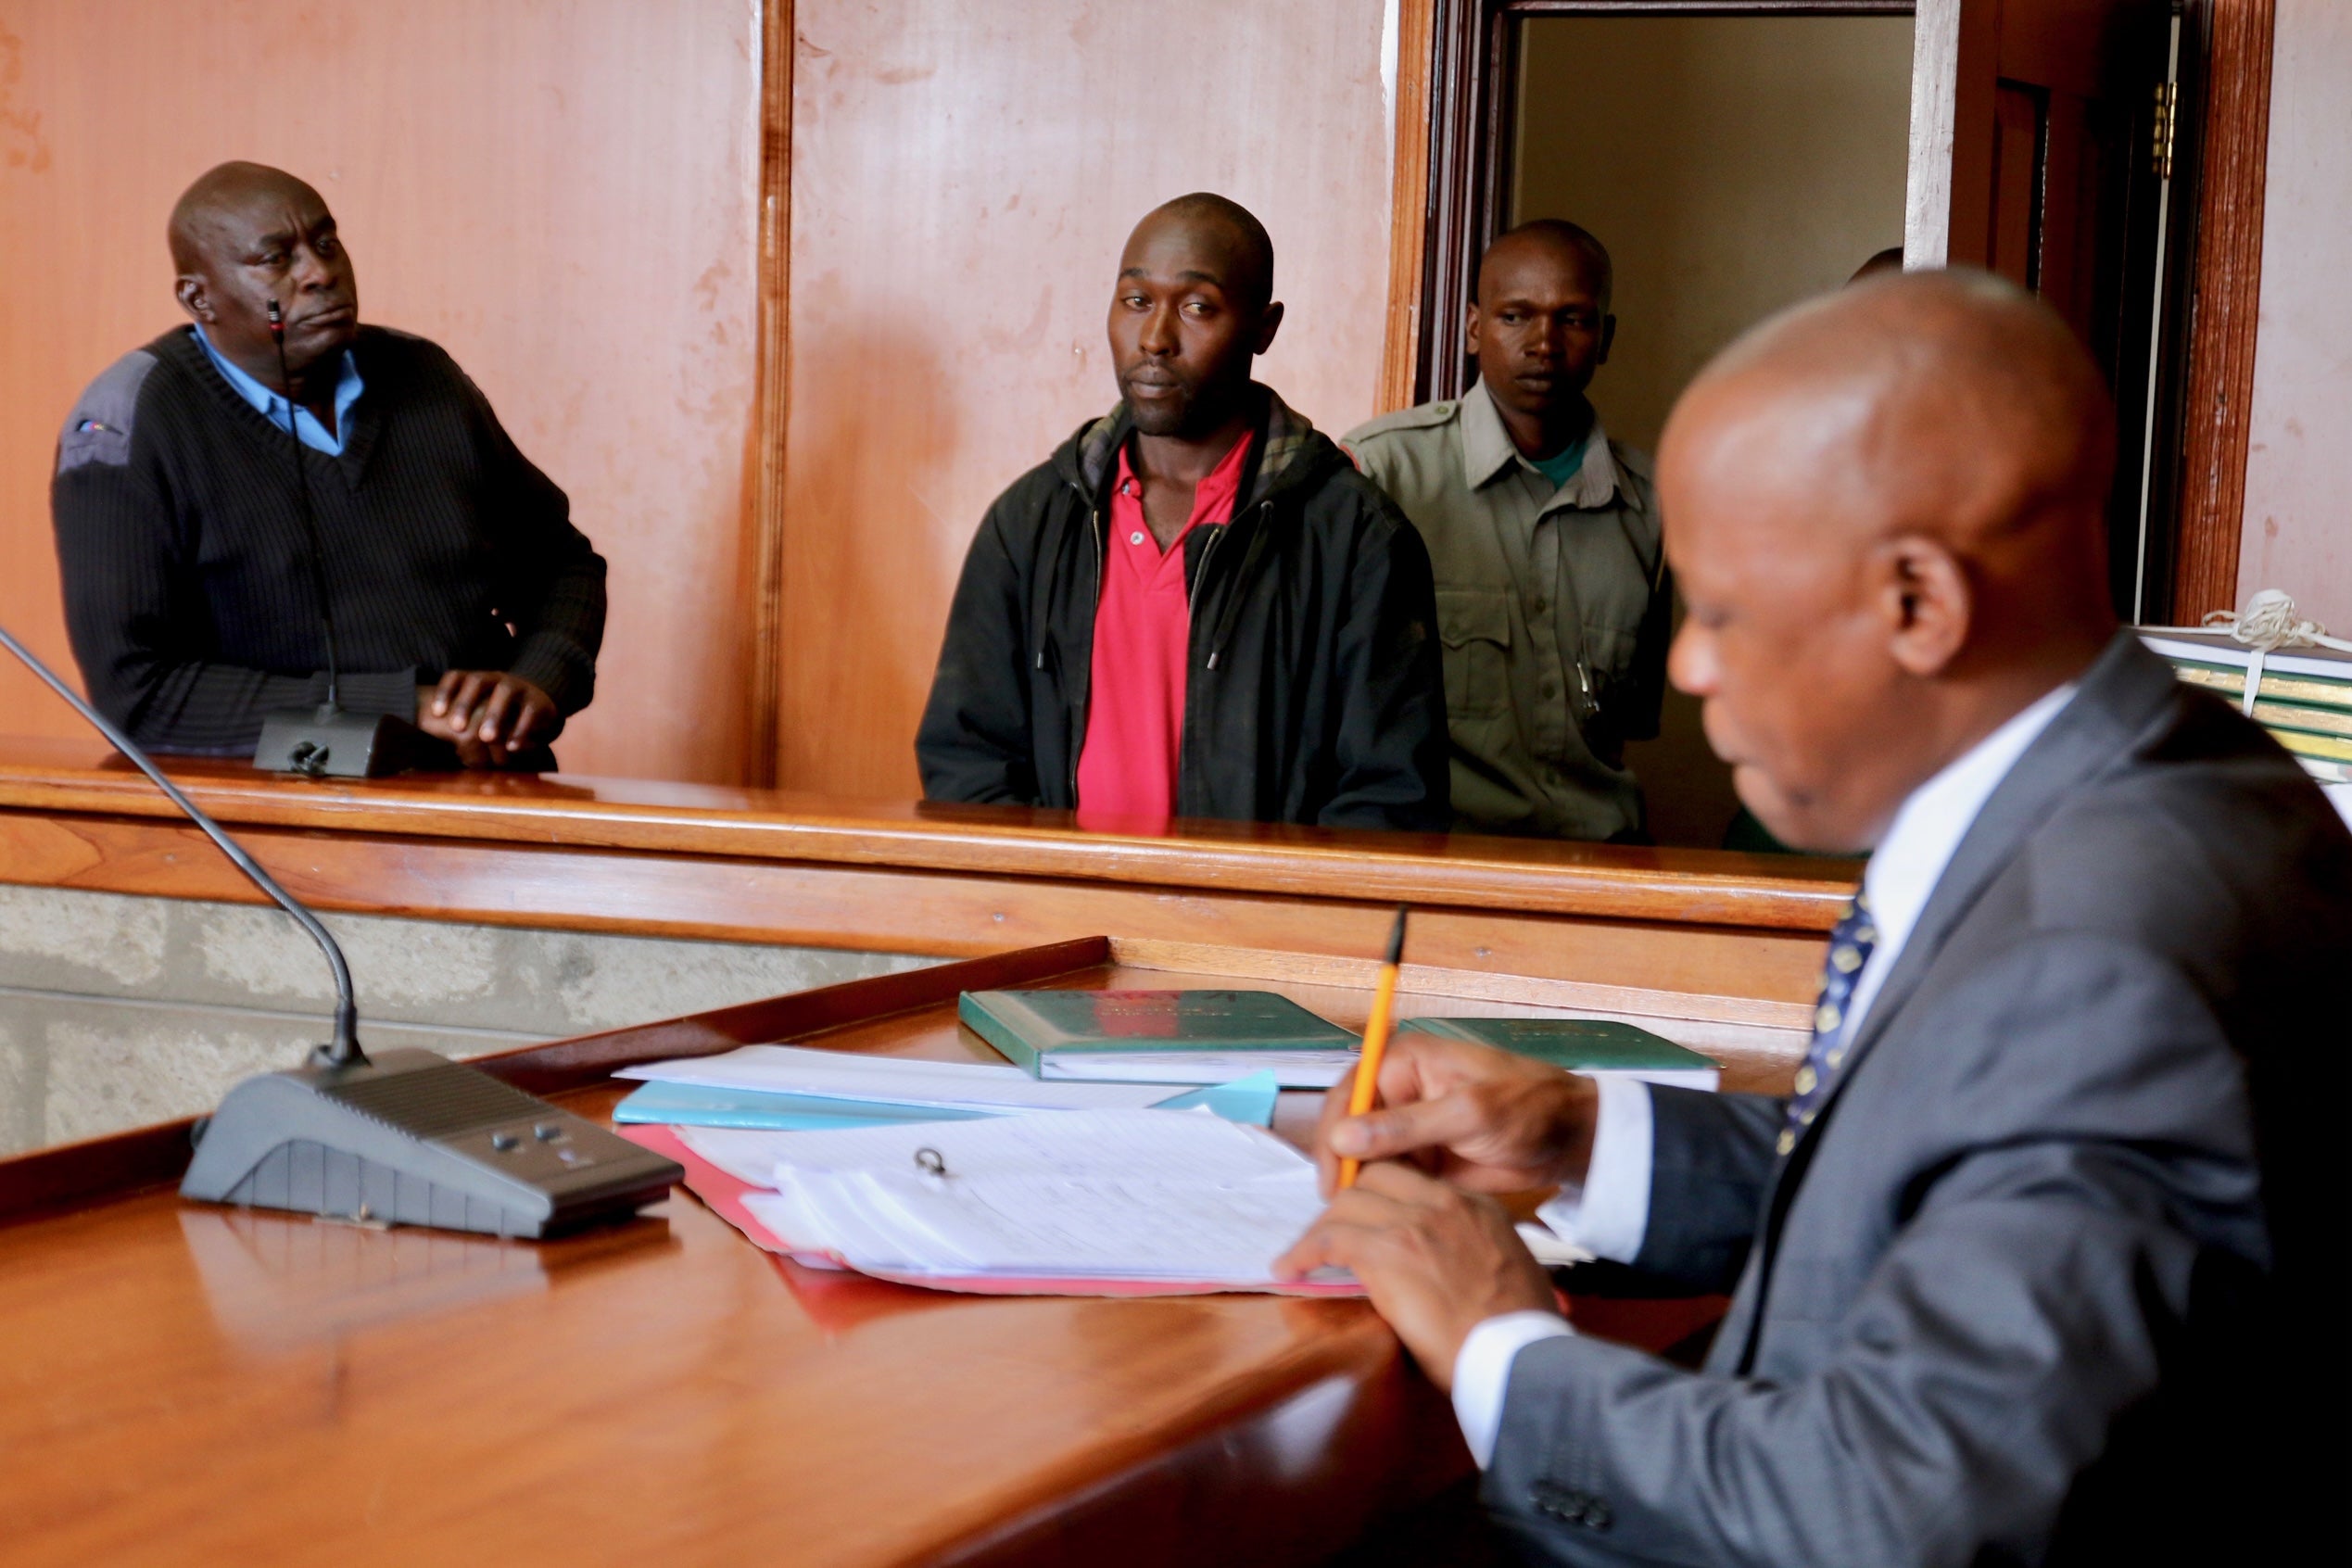 Zachary Mboya Kinyua was convicted by Senior Resident Magistrate Phillip Mutua after he was found guilty of possessing two elephant tusks.